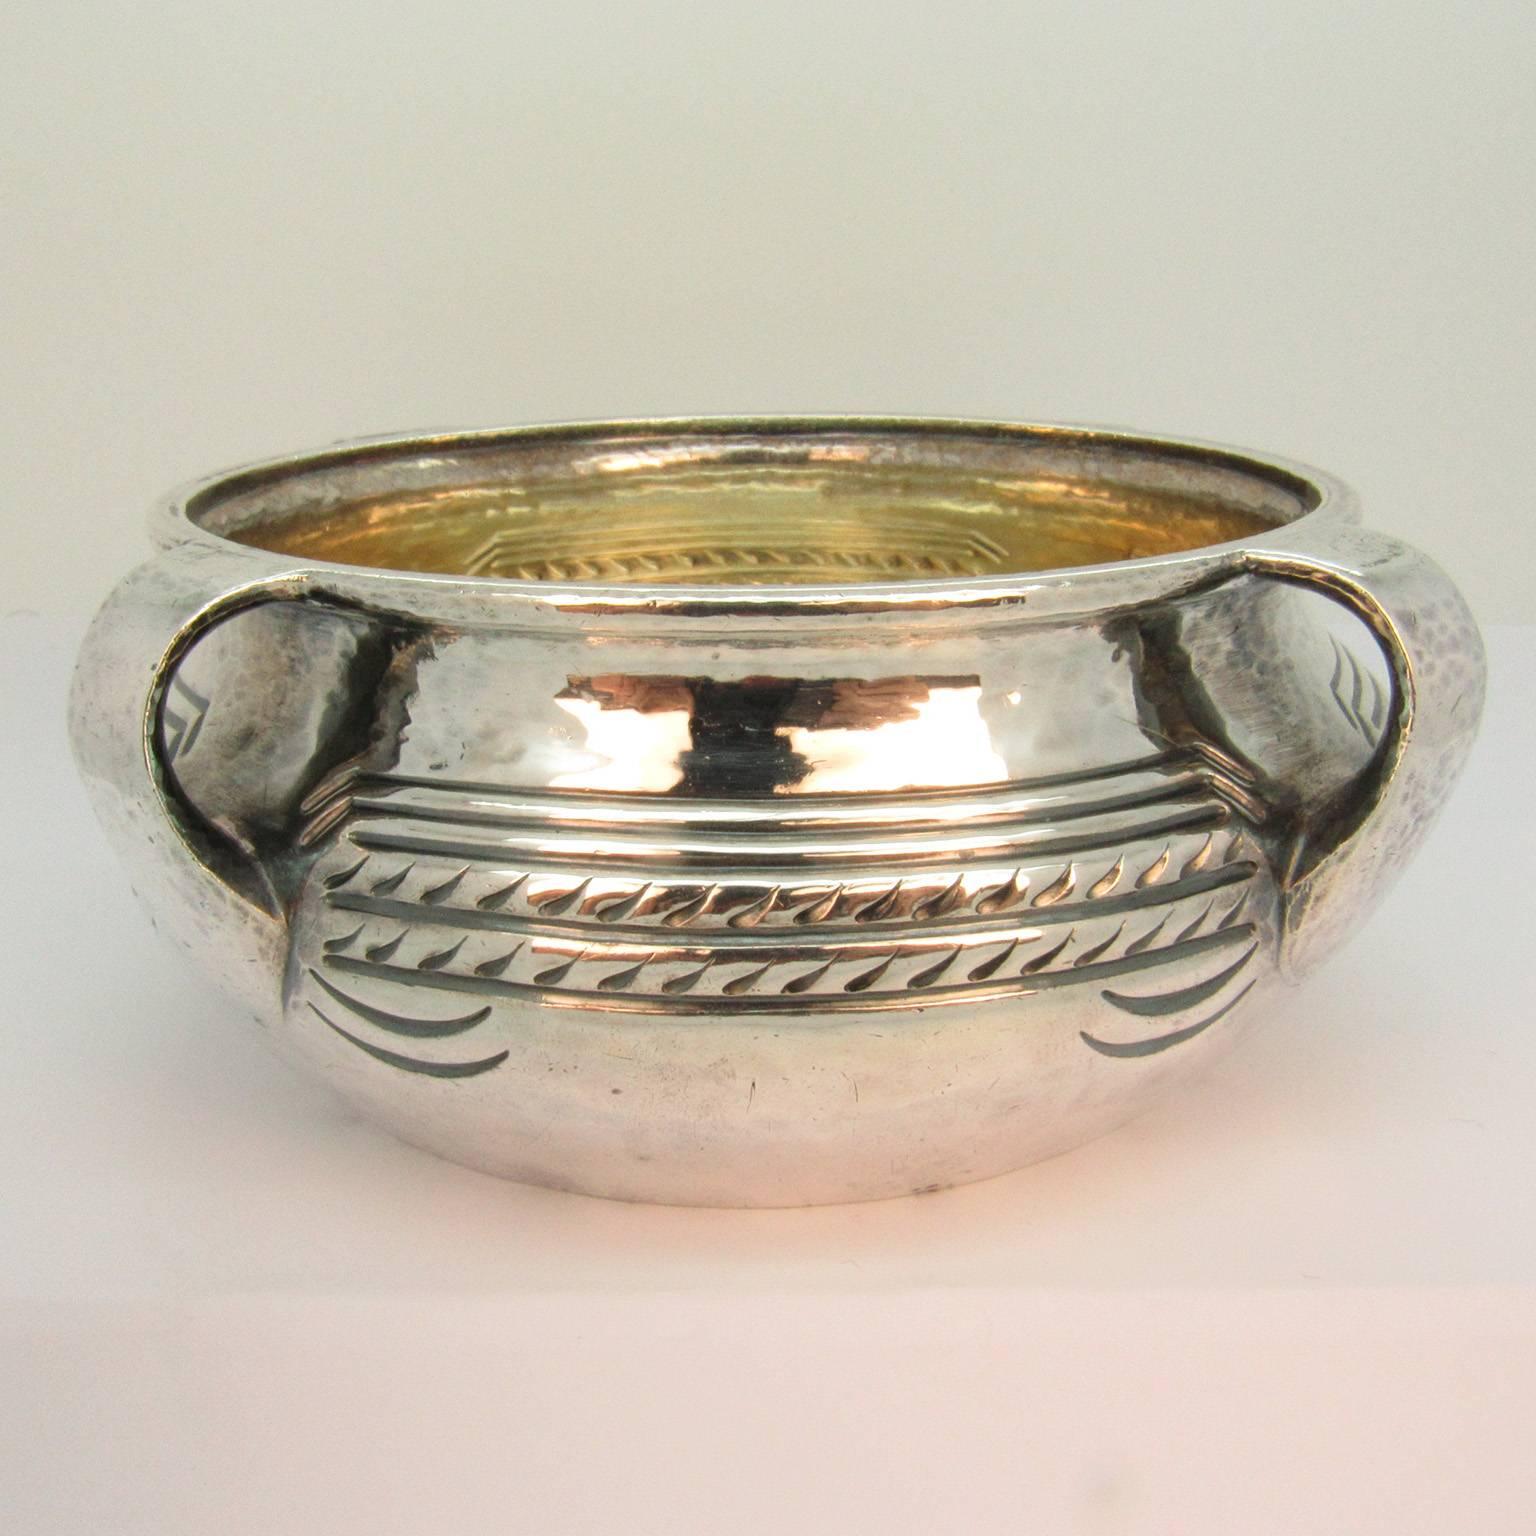 Frank Walter Lawrence (American, 1864-1929) Arts and Crafts period four handled hand-hammered sterling silver bowl with gold wash interior. Marked 